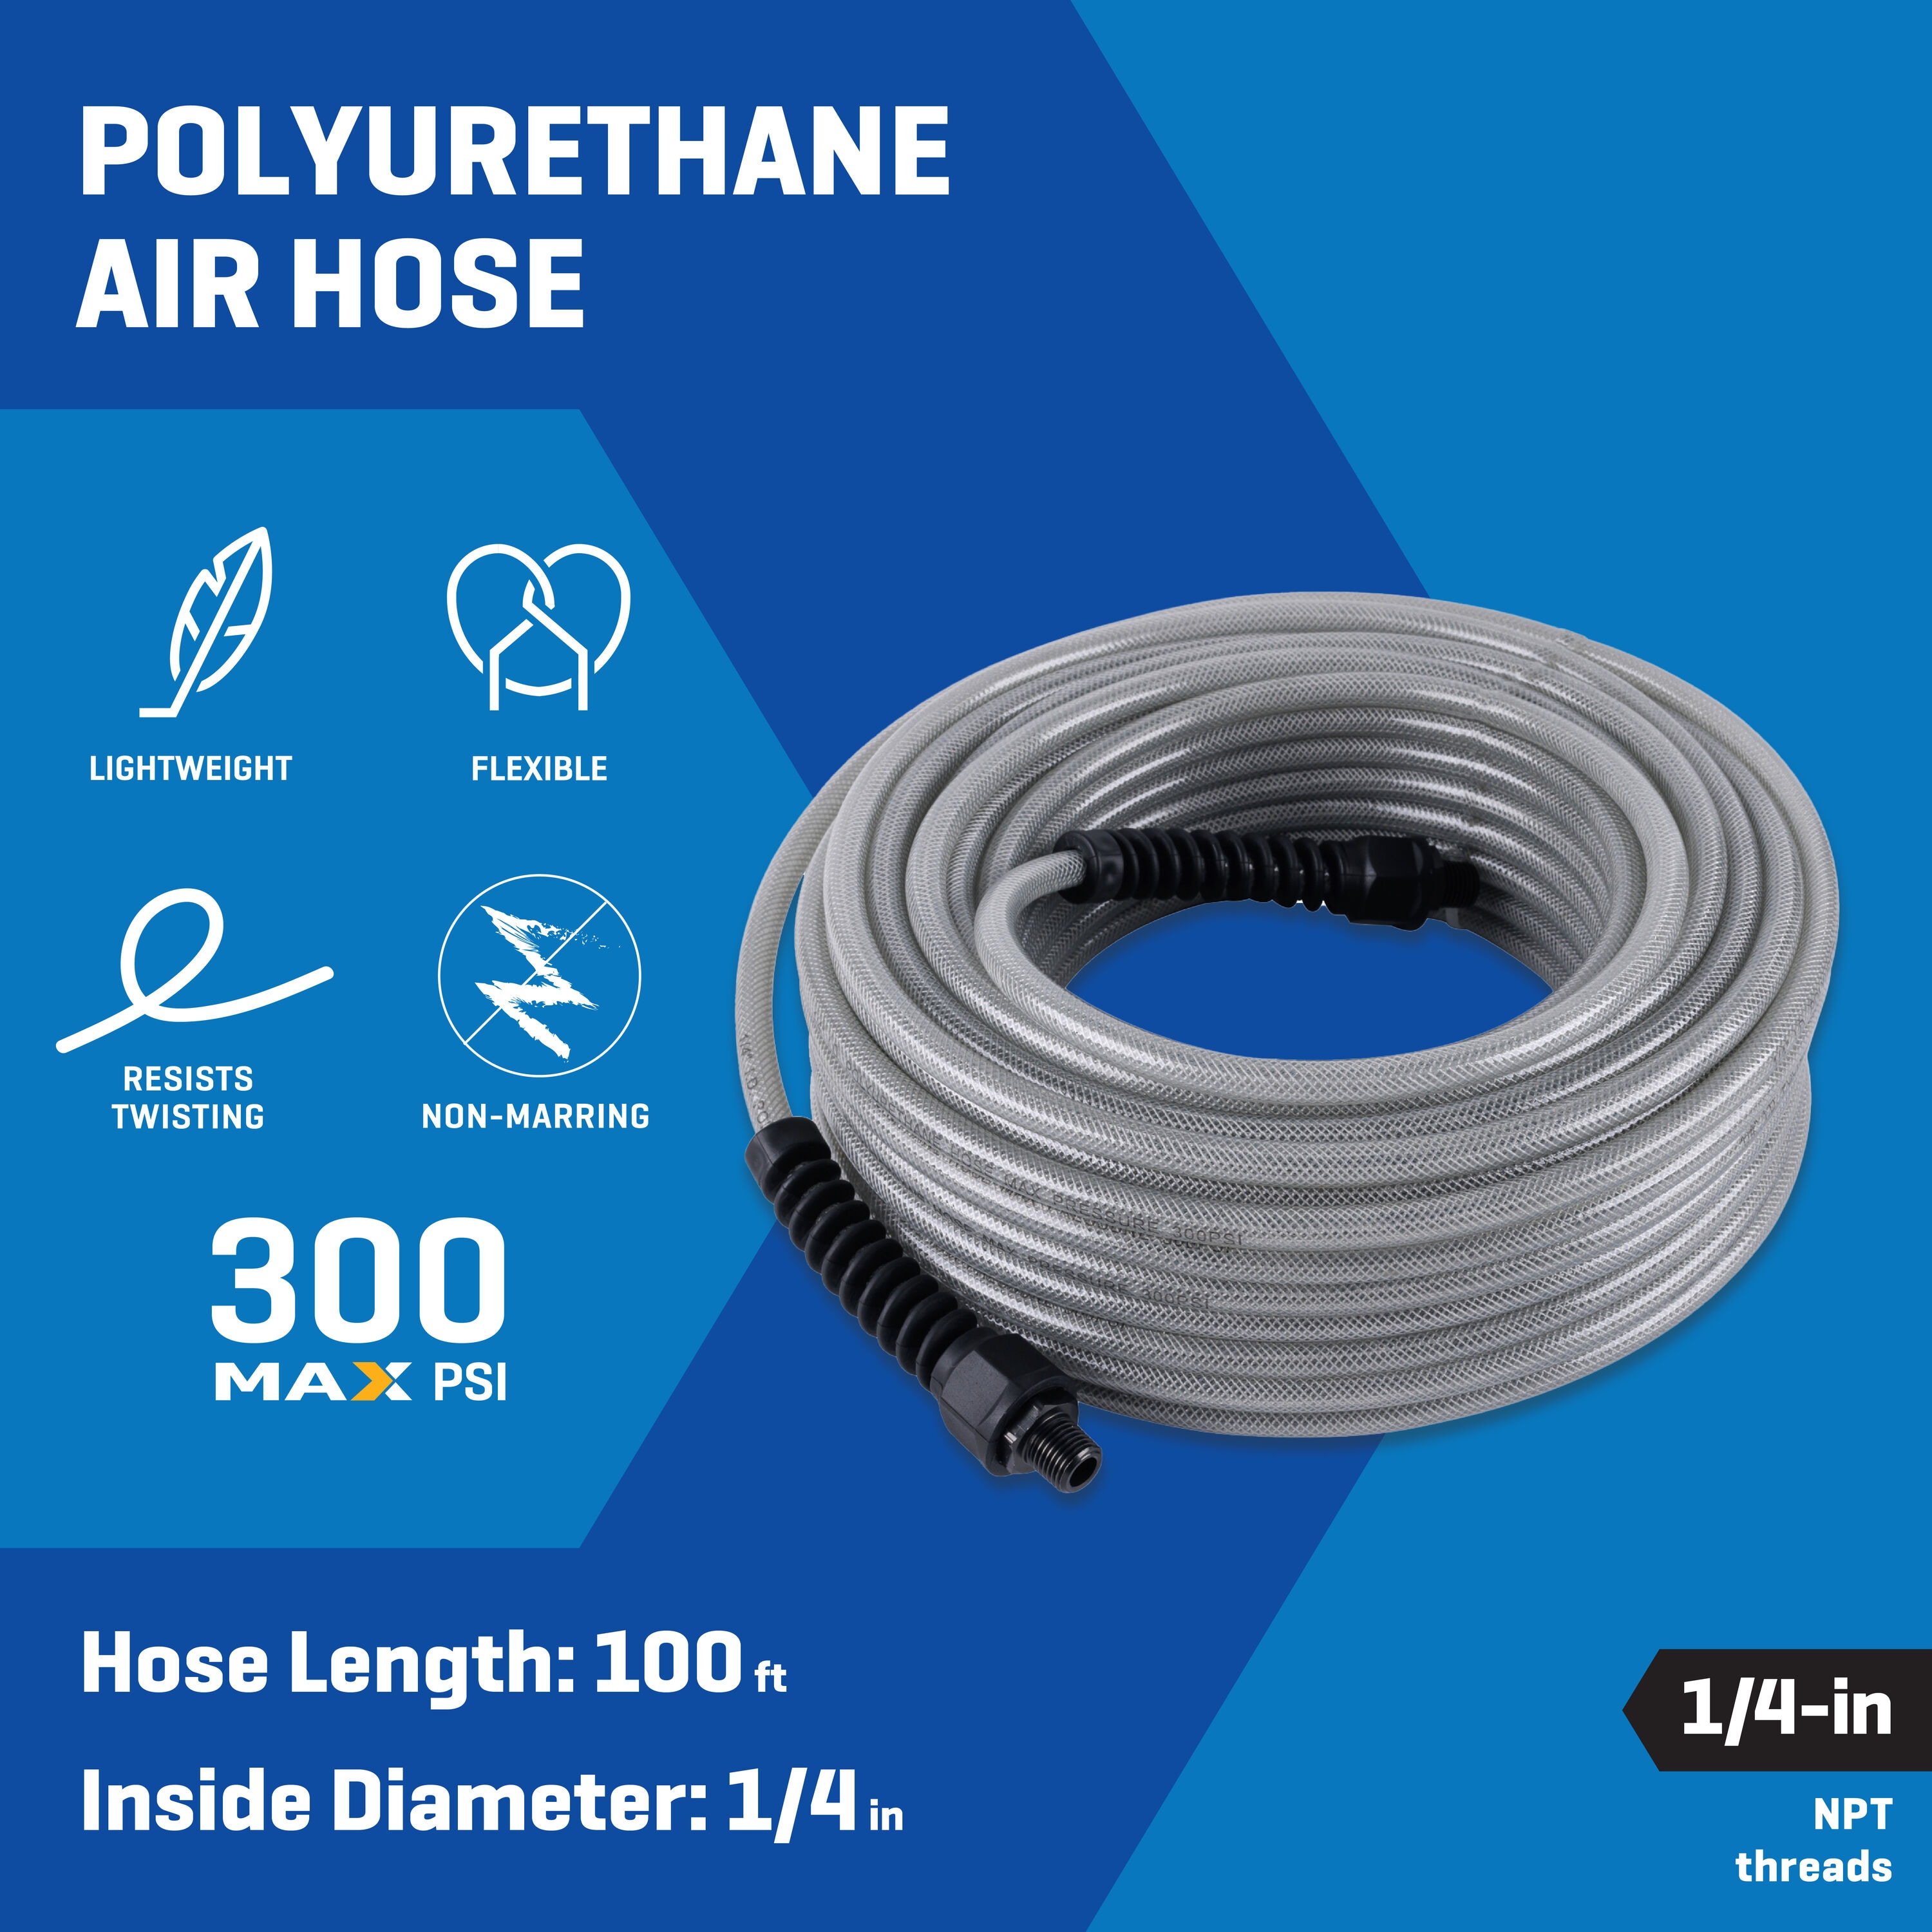 Air Hose 1/4 in x 25 ft, Polyurethane(PU), Reinforced Air Compressor Hose,  Lightweight, Kink Resistant with 1/4” Industrial High Flow Quick